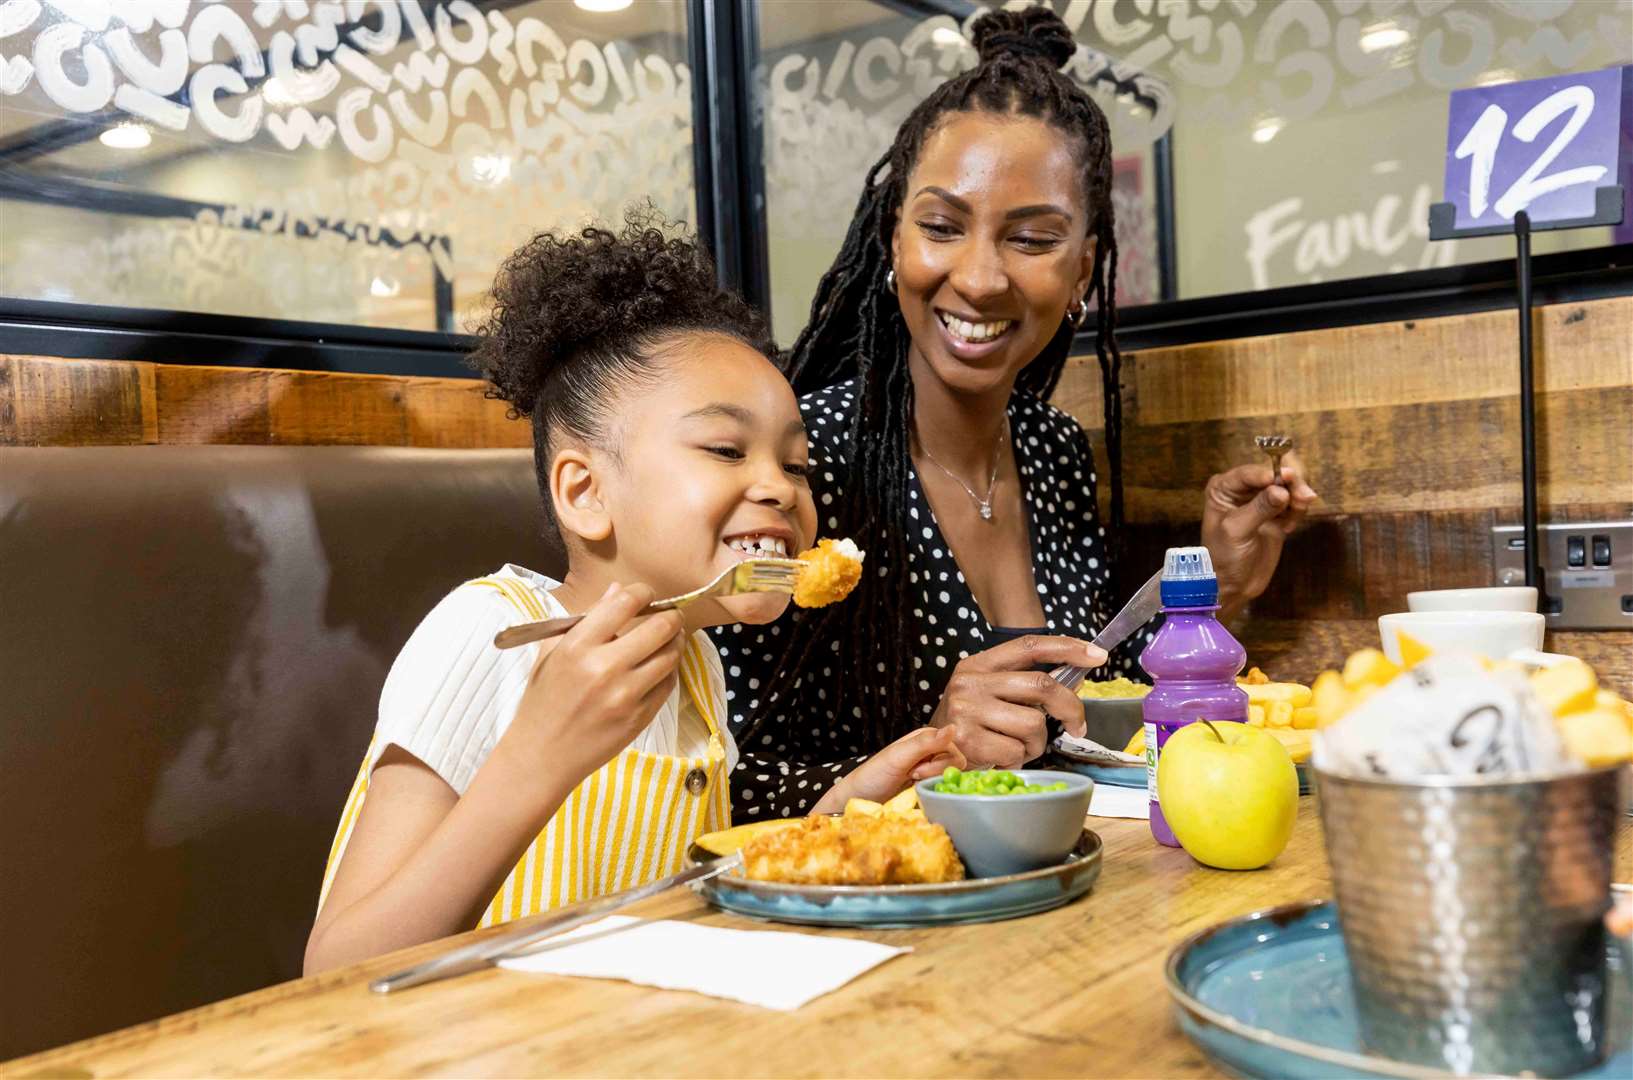 Adults and children dining together will be able to claim the Morrisons promotion